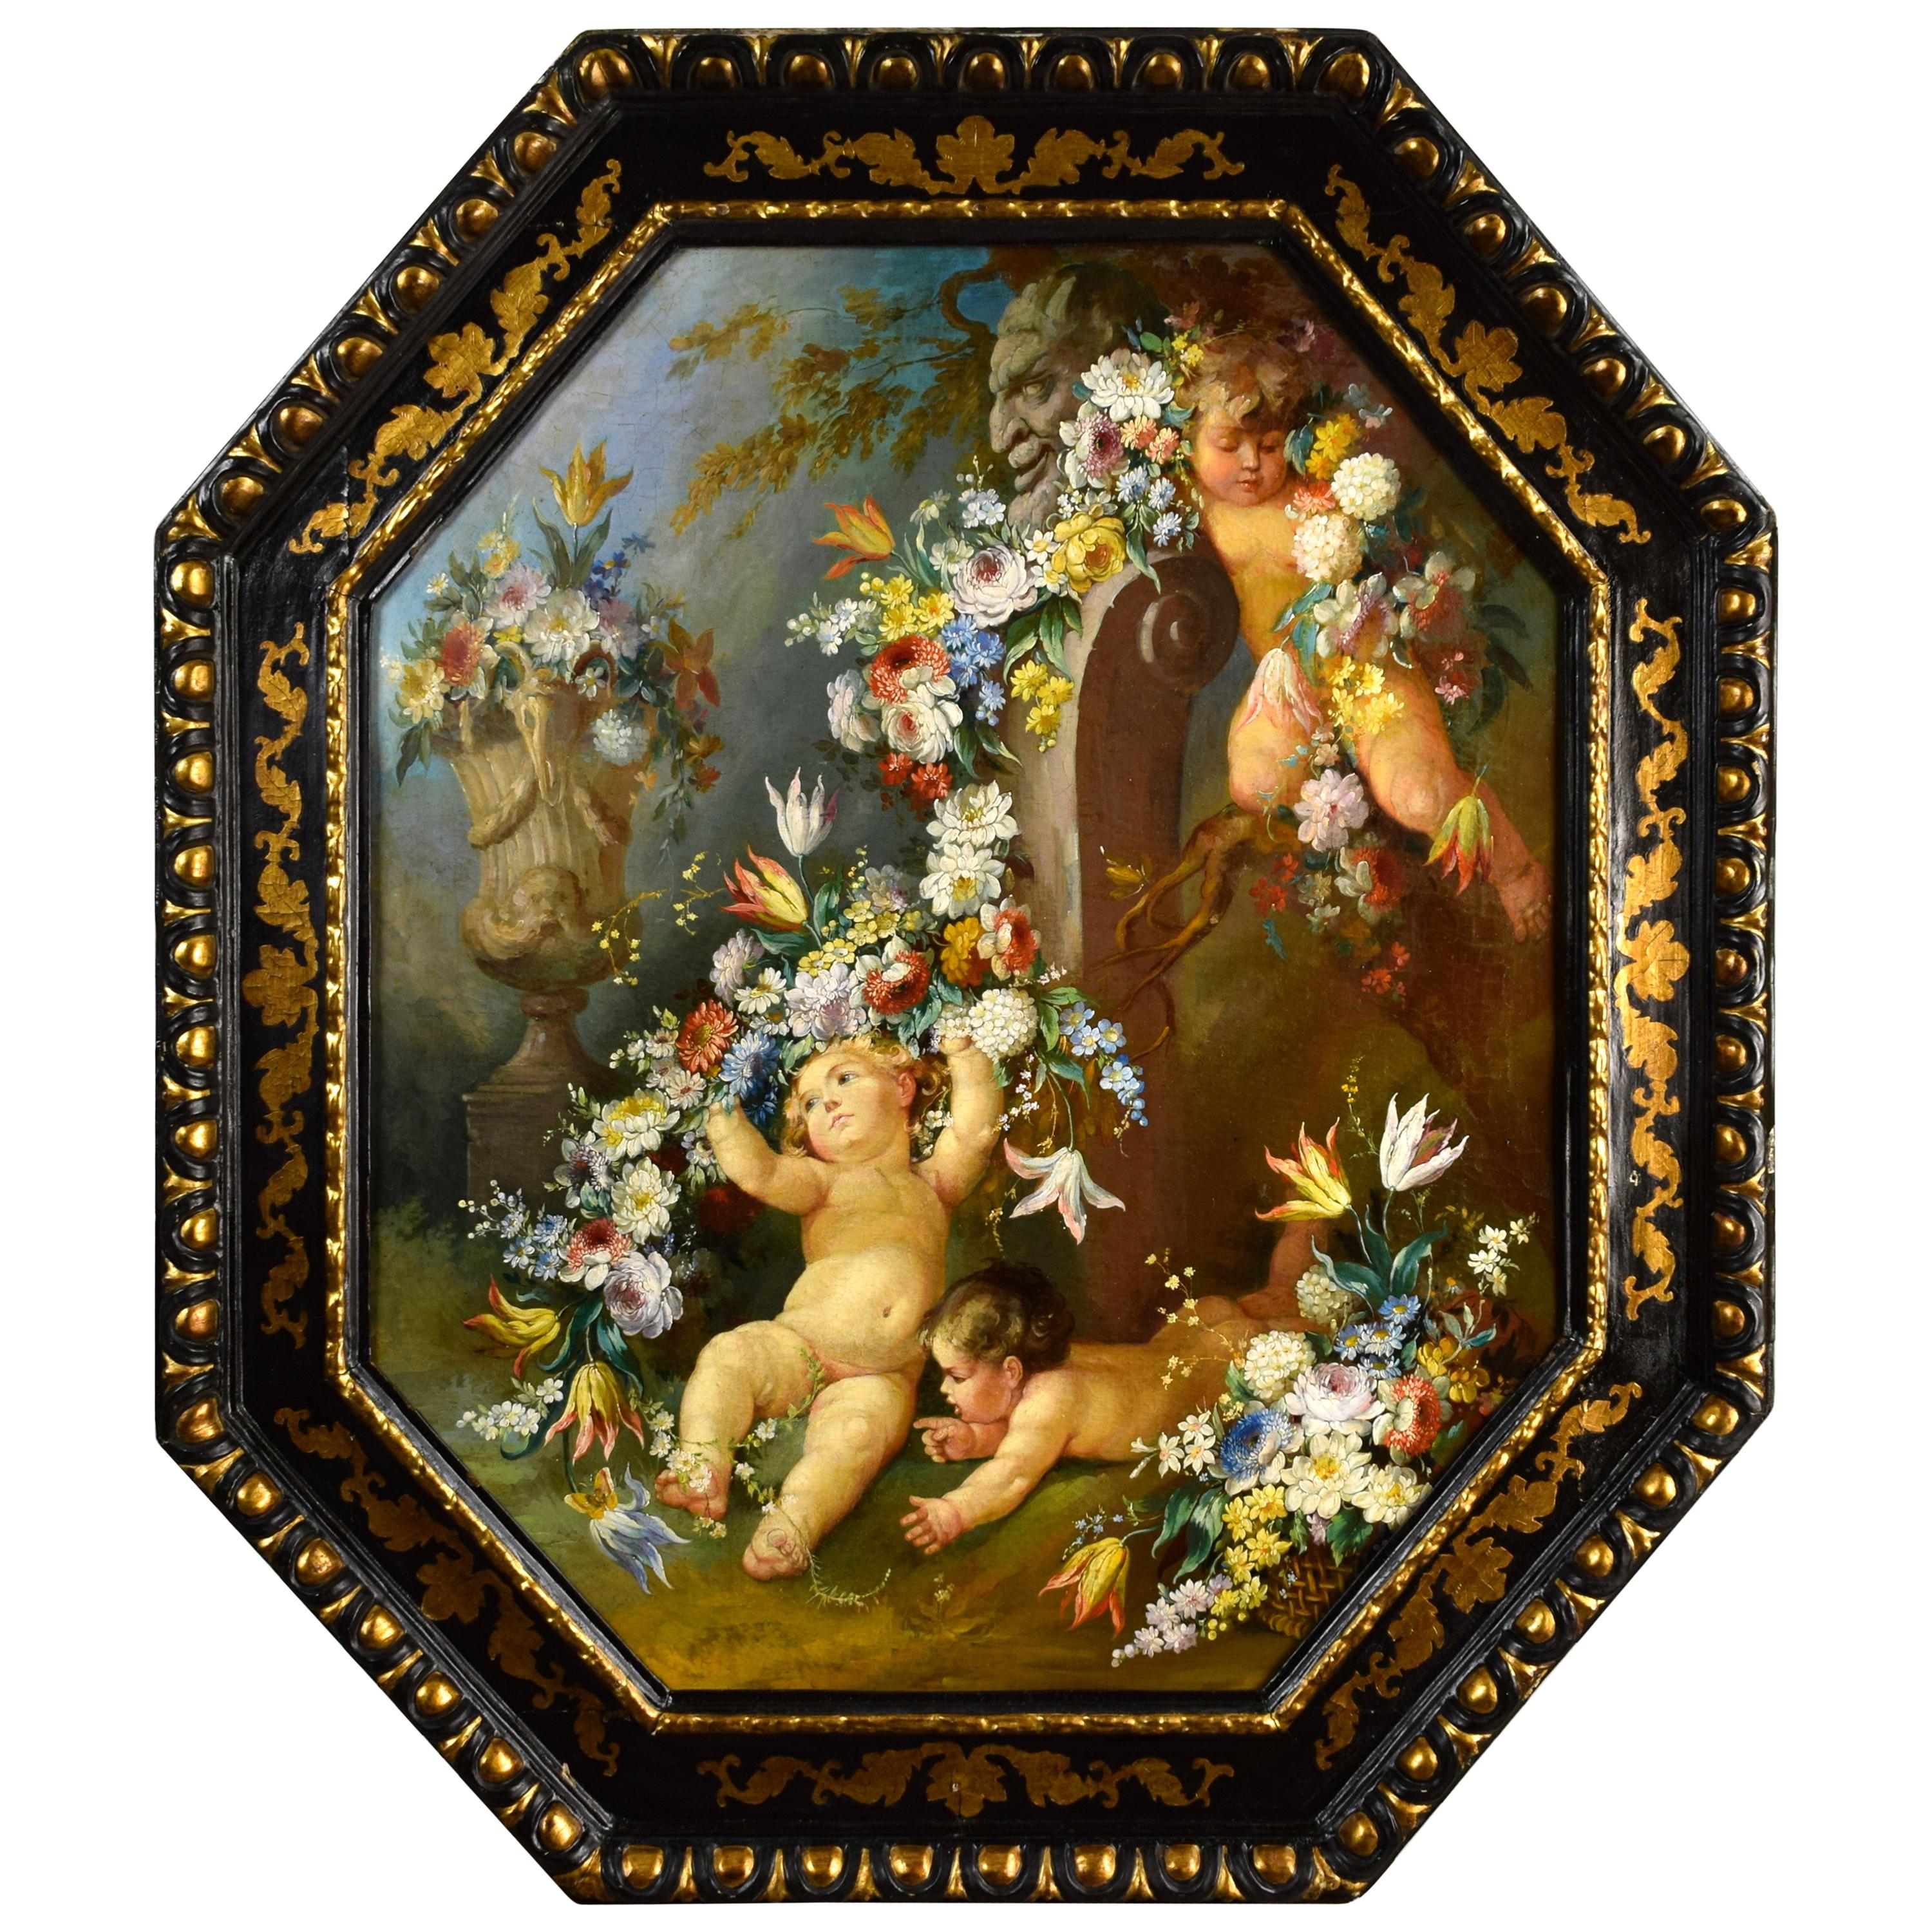 19th Century, Italian Painting with Still Life with Cherubs